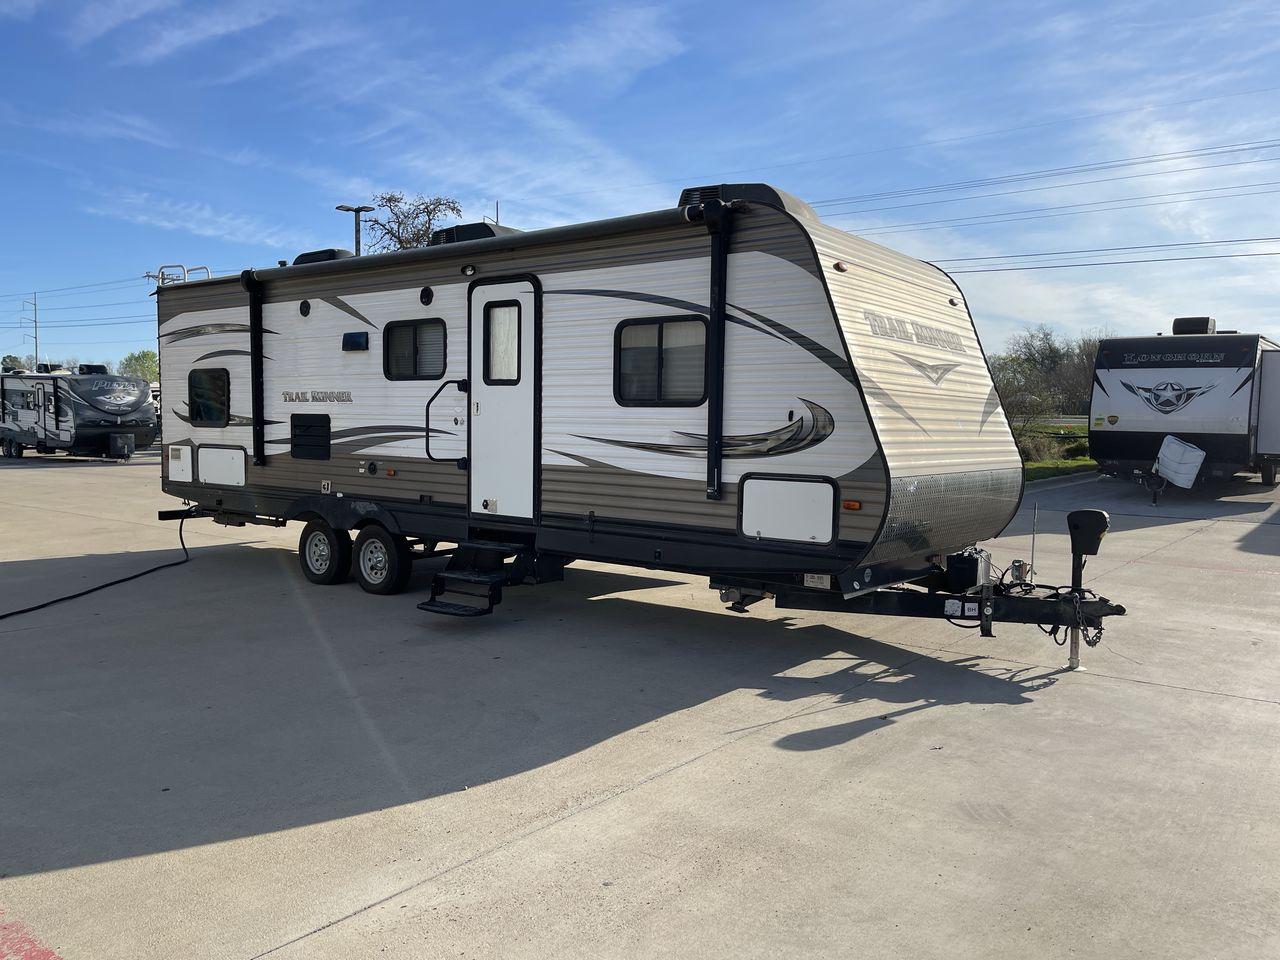 2017 HEARTLAND TRAILRUNNER 27FQBS (5SFEB3029HE) , Length: 30.58 ft. | Dry Weight: 6,081 lbs. | Gross Weight: 7,700 lbs. | Slides: 1 transmission, located at 4319 N Main Street, Cleburne, TX, 76033, (817) 221-0660, 32.435829, -97.384178 - The 2017 Heartland Trail Runner 27FQBS is a versatile and well-designed travel trailer tailored for unforgettable outdoor adventures. Measuring 30 feet in length and boasting a dry weight of 6,081 lbs, this model offers a perfect balance of spaciousness and towing convenience. Built with a durable e - Photo #23